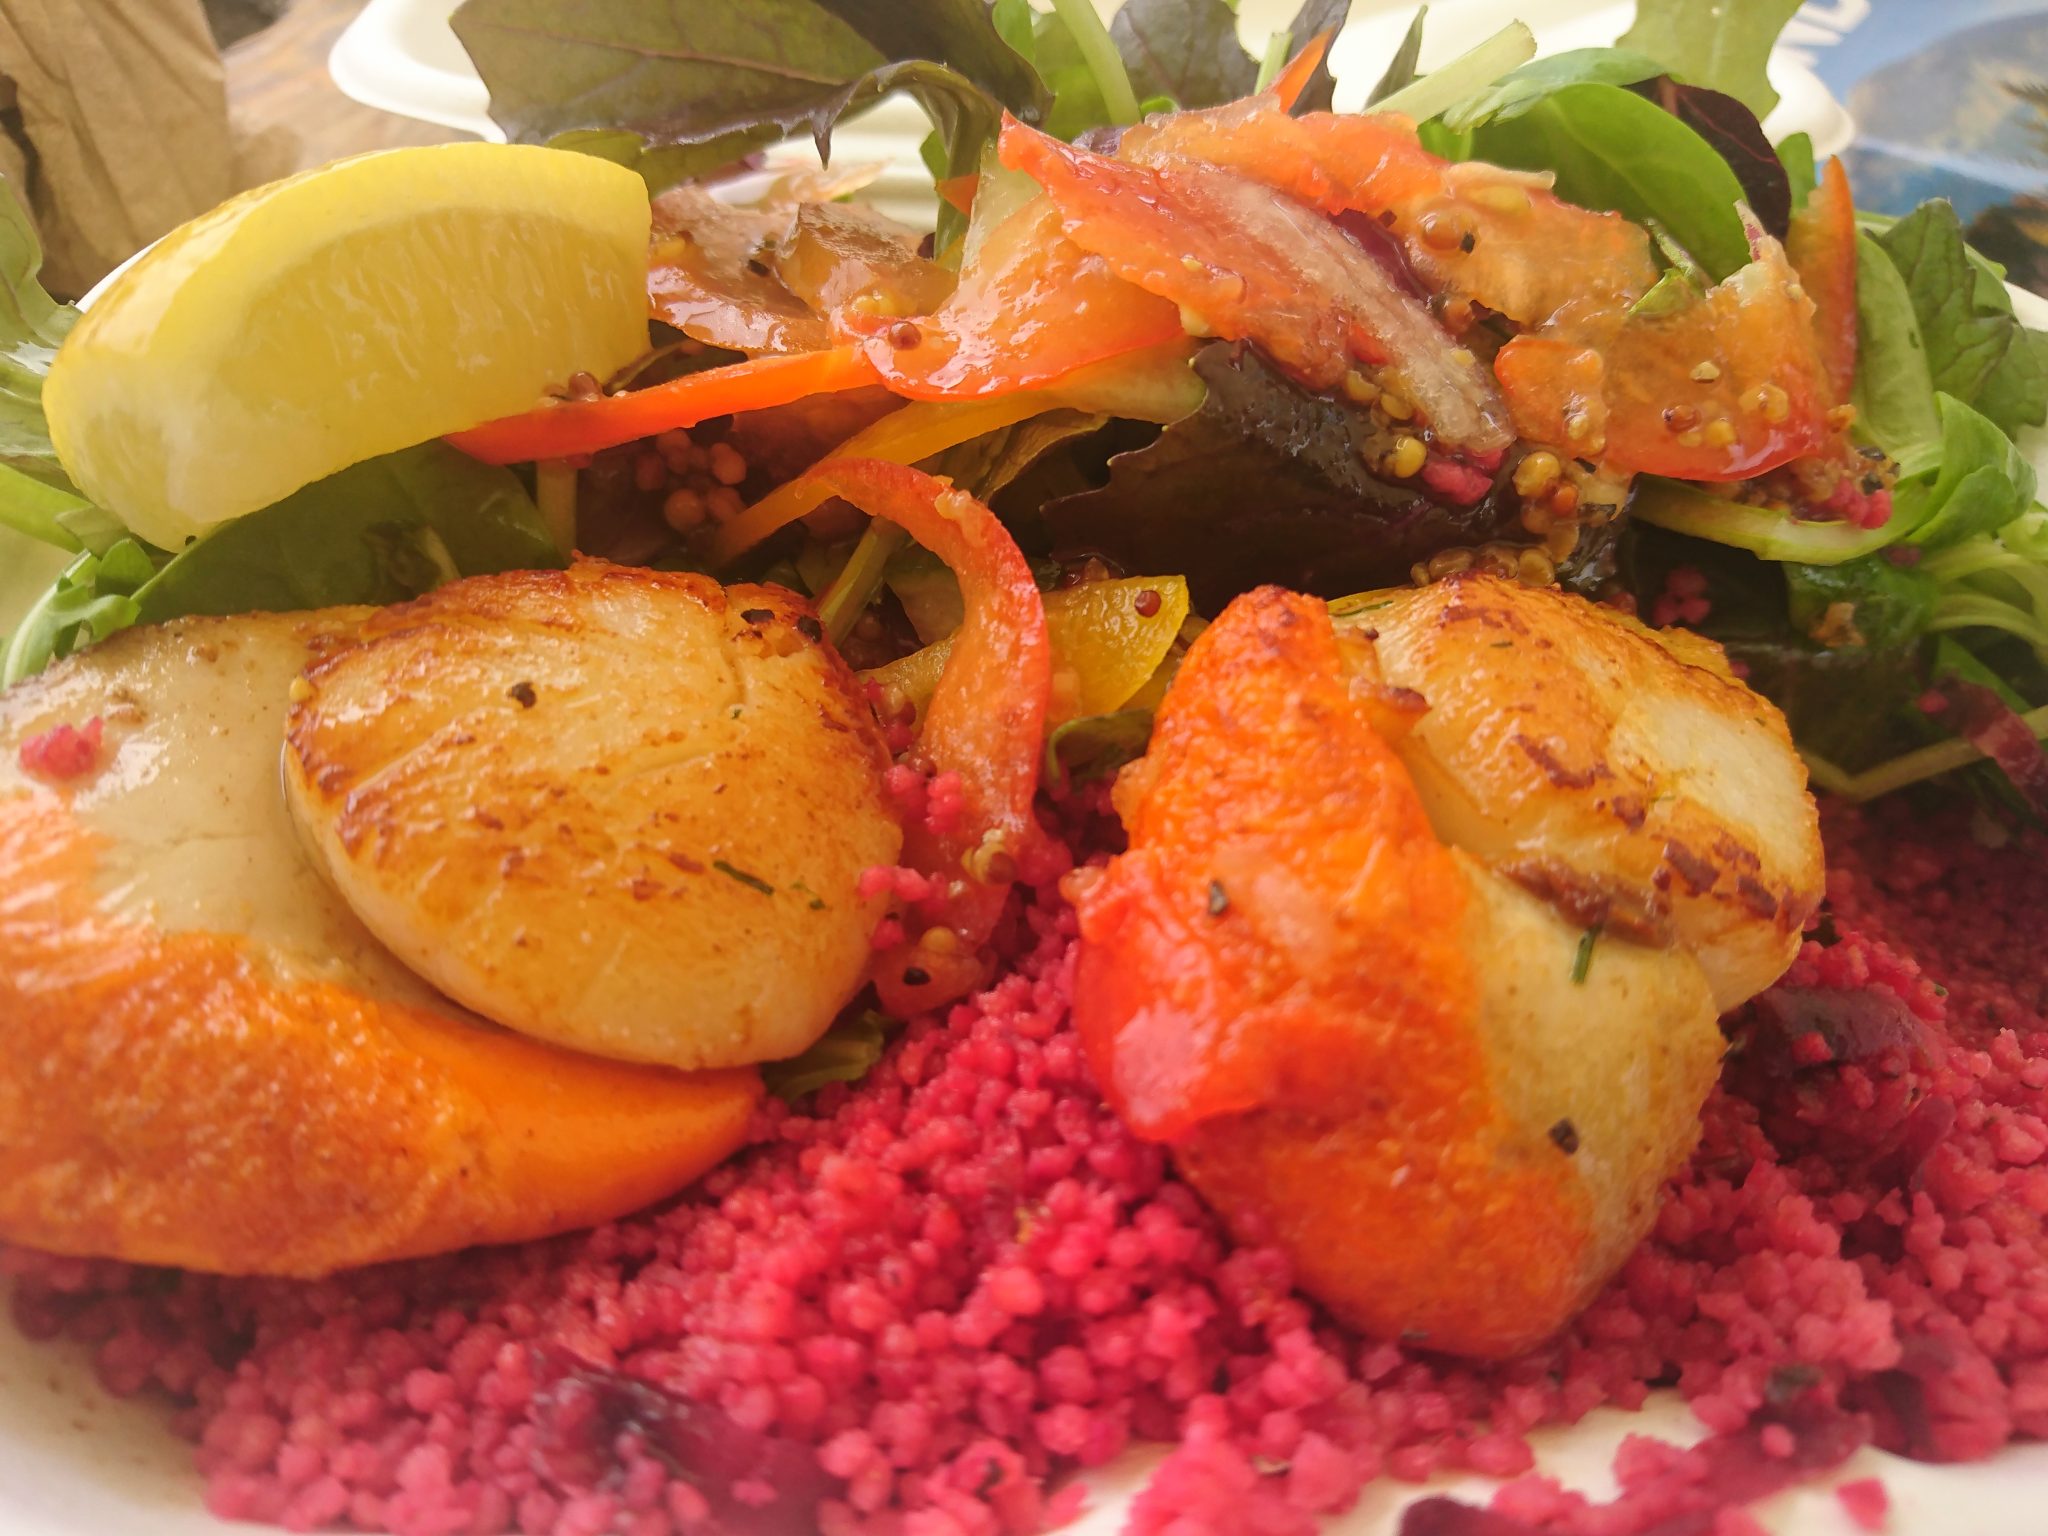 Hand dived scallops, served with couscous, lemon and salad